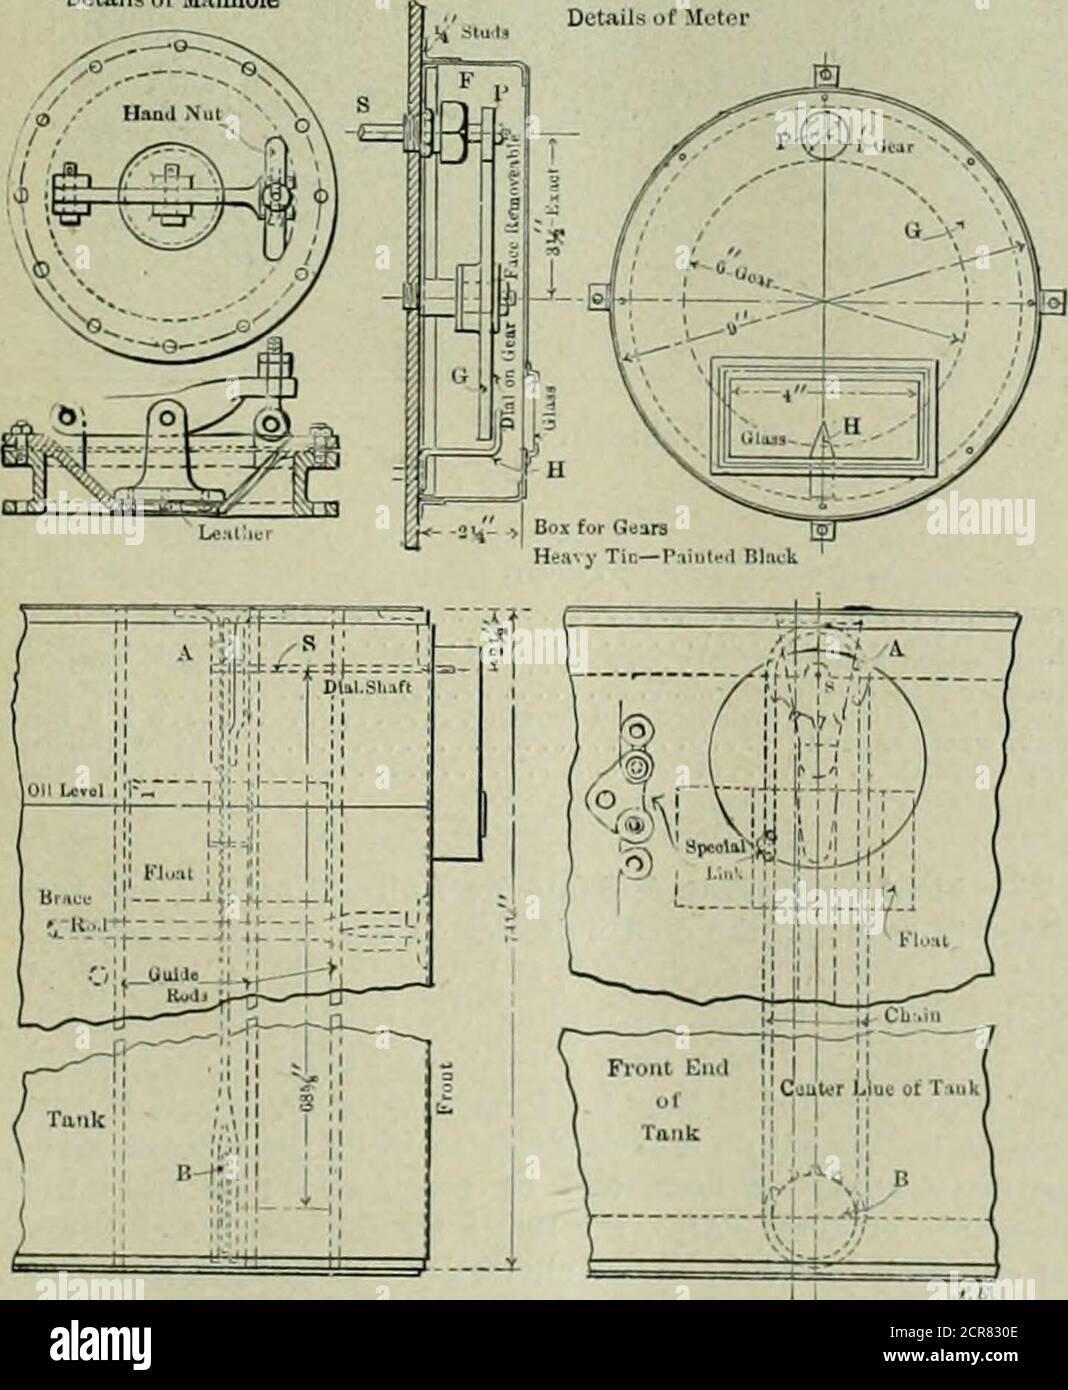 . American engineer and railroad journal . 41„ugTu.-etir«,w Construction of Tanks and Arrangement of Heater Coil Connections. DeuiUs of Manhole. Details of Locomotive Tank Manhole and Filling Hole, and ofTank Oil Meter or Cauge.Boston & Maine Railroad, link, so that as it moves it carries with it the chain and thusrevolves its supporting sprocket wheels. The upper sprocketA is keyed onto the dial-shaft S, which extends through theair-tight stuffing-box F, out into the meter outside the tank,and has keyed onto its outer end the pinion P. This pinionmeshes with the larger gear G in such a ratio Stock Photo